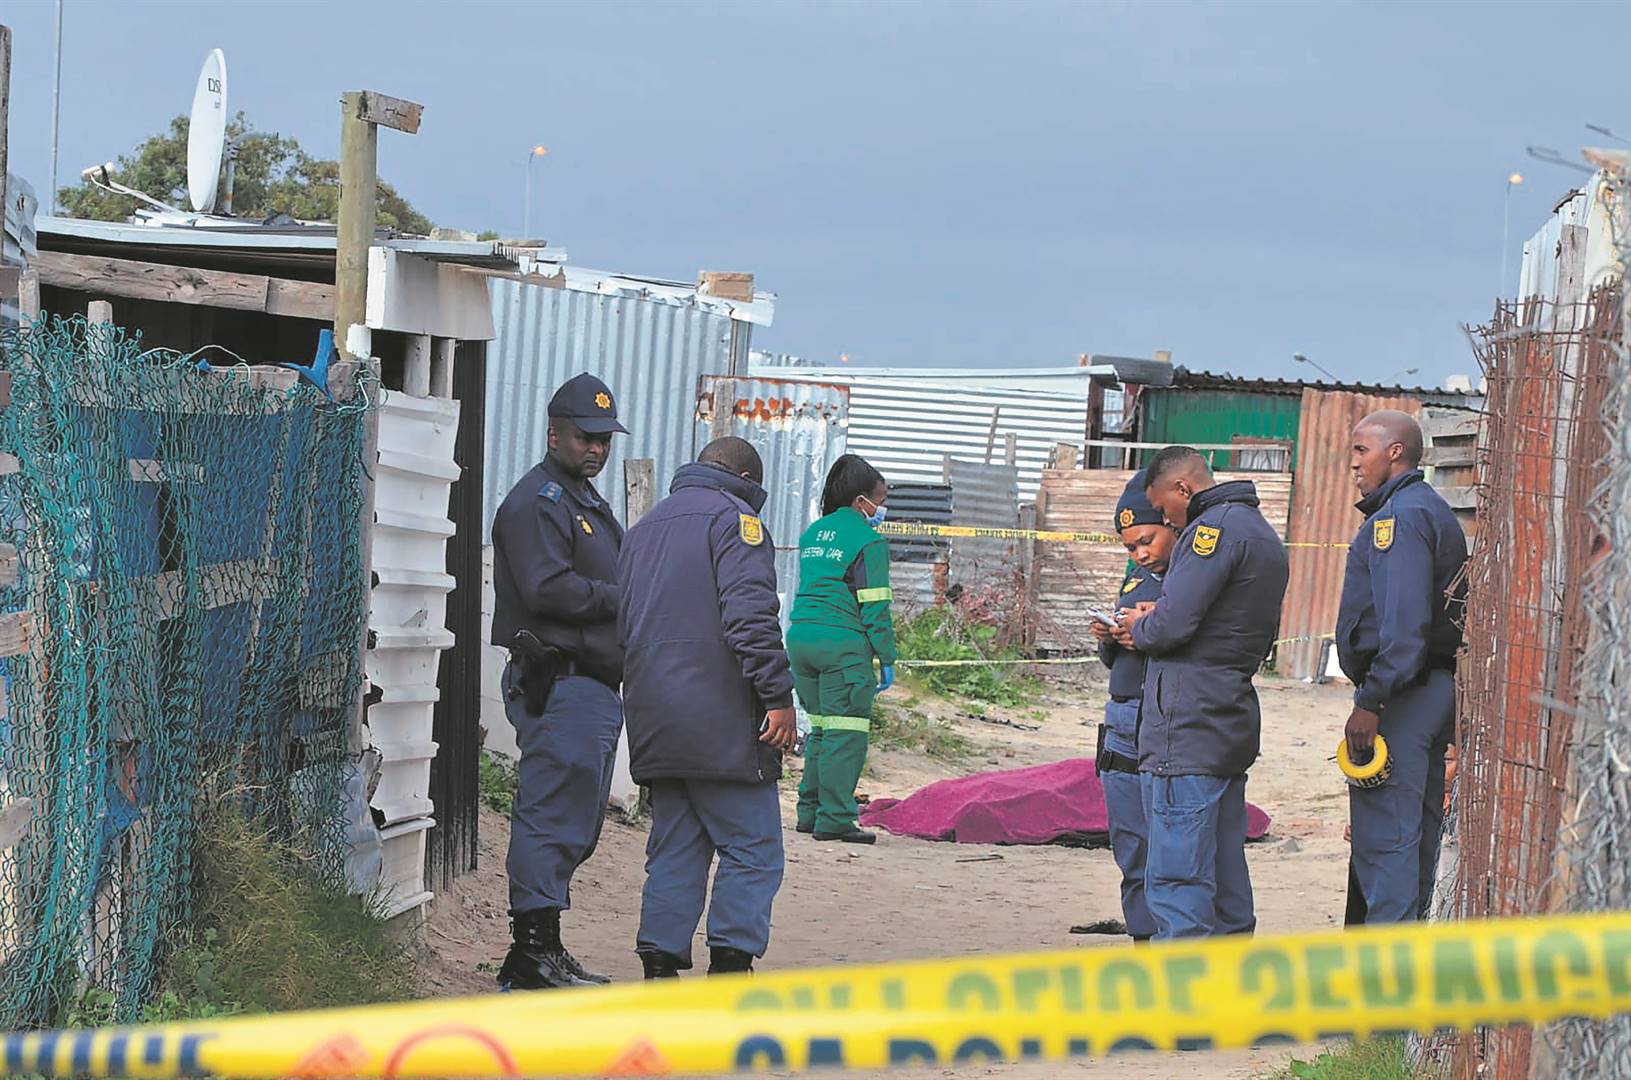 Cops at the scene of the murder incident in Lockdown squatter camp, Delft. Photo byLulekwa Mbadamane